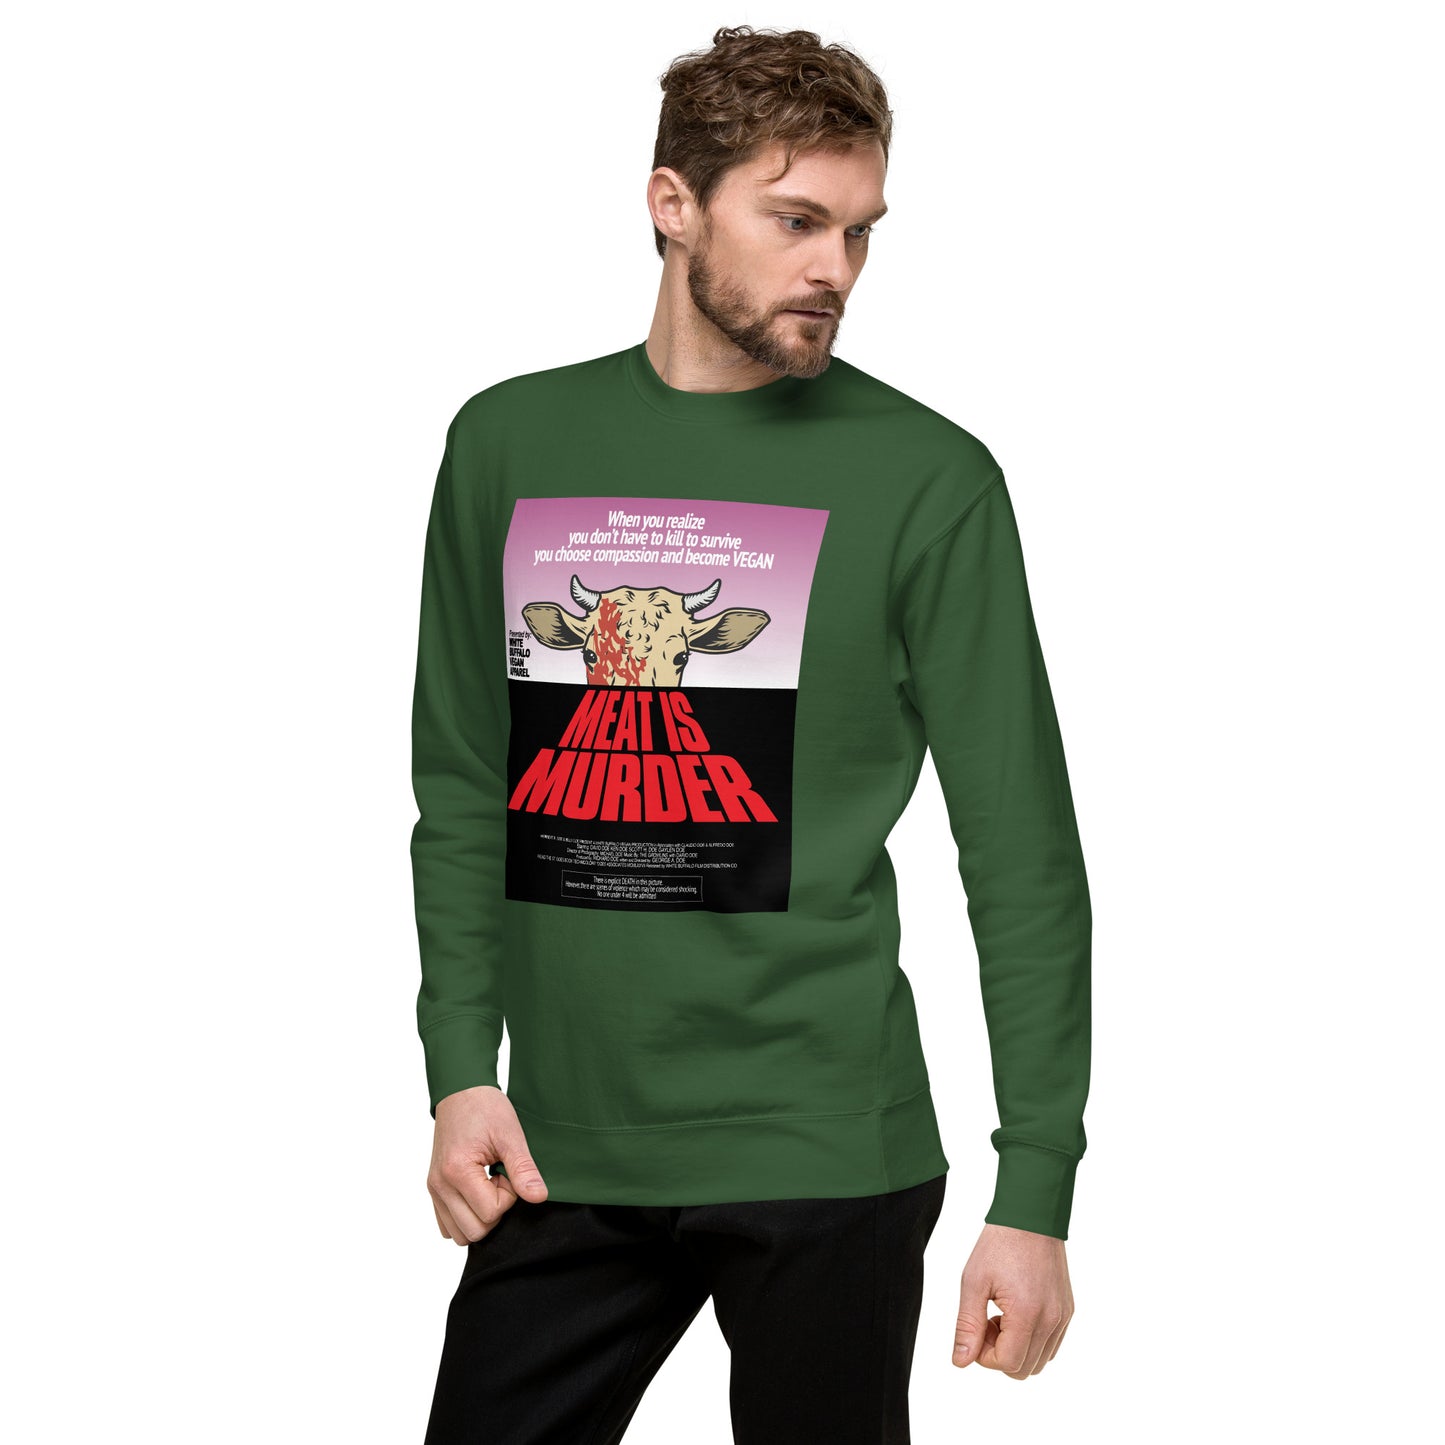 Green Sweater Charcoal Heather Meat is Murder inspired by Dawn of the Dead poster created by White Buffalo Vegan Apparel